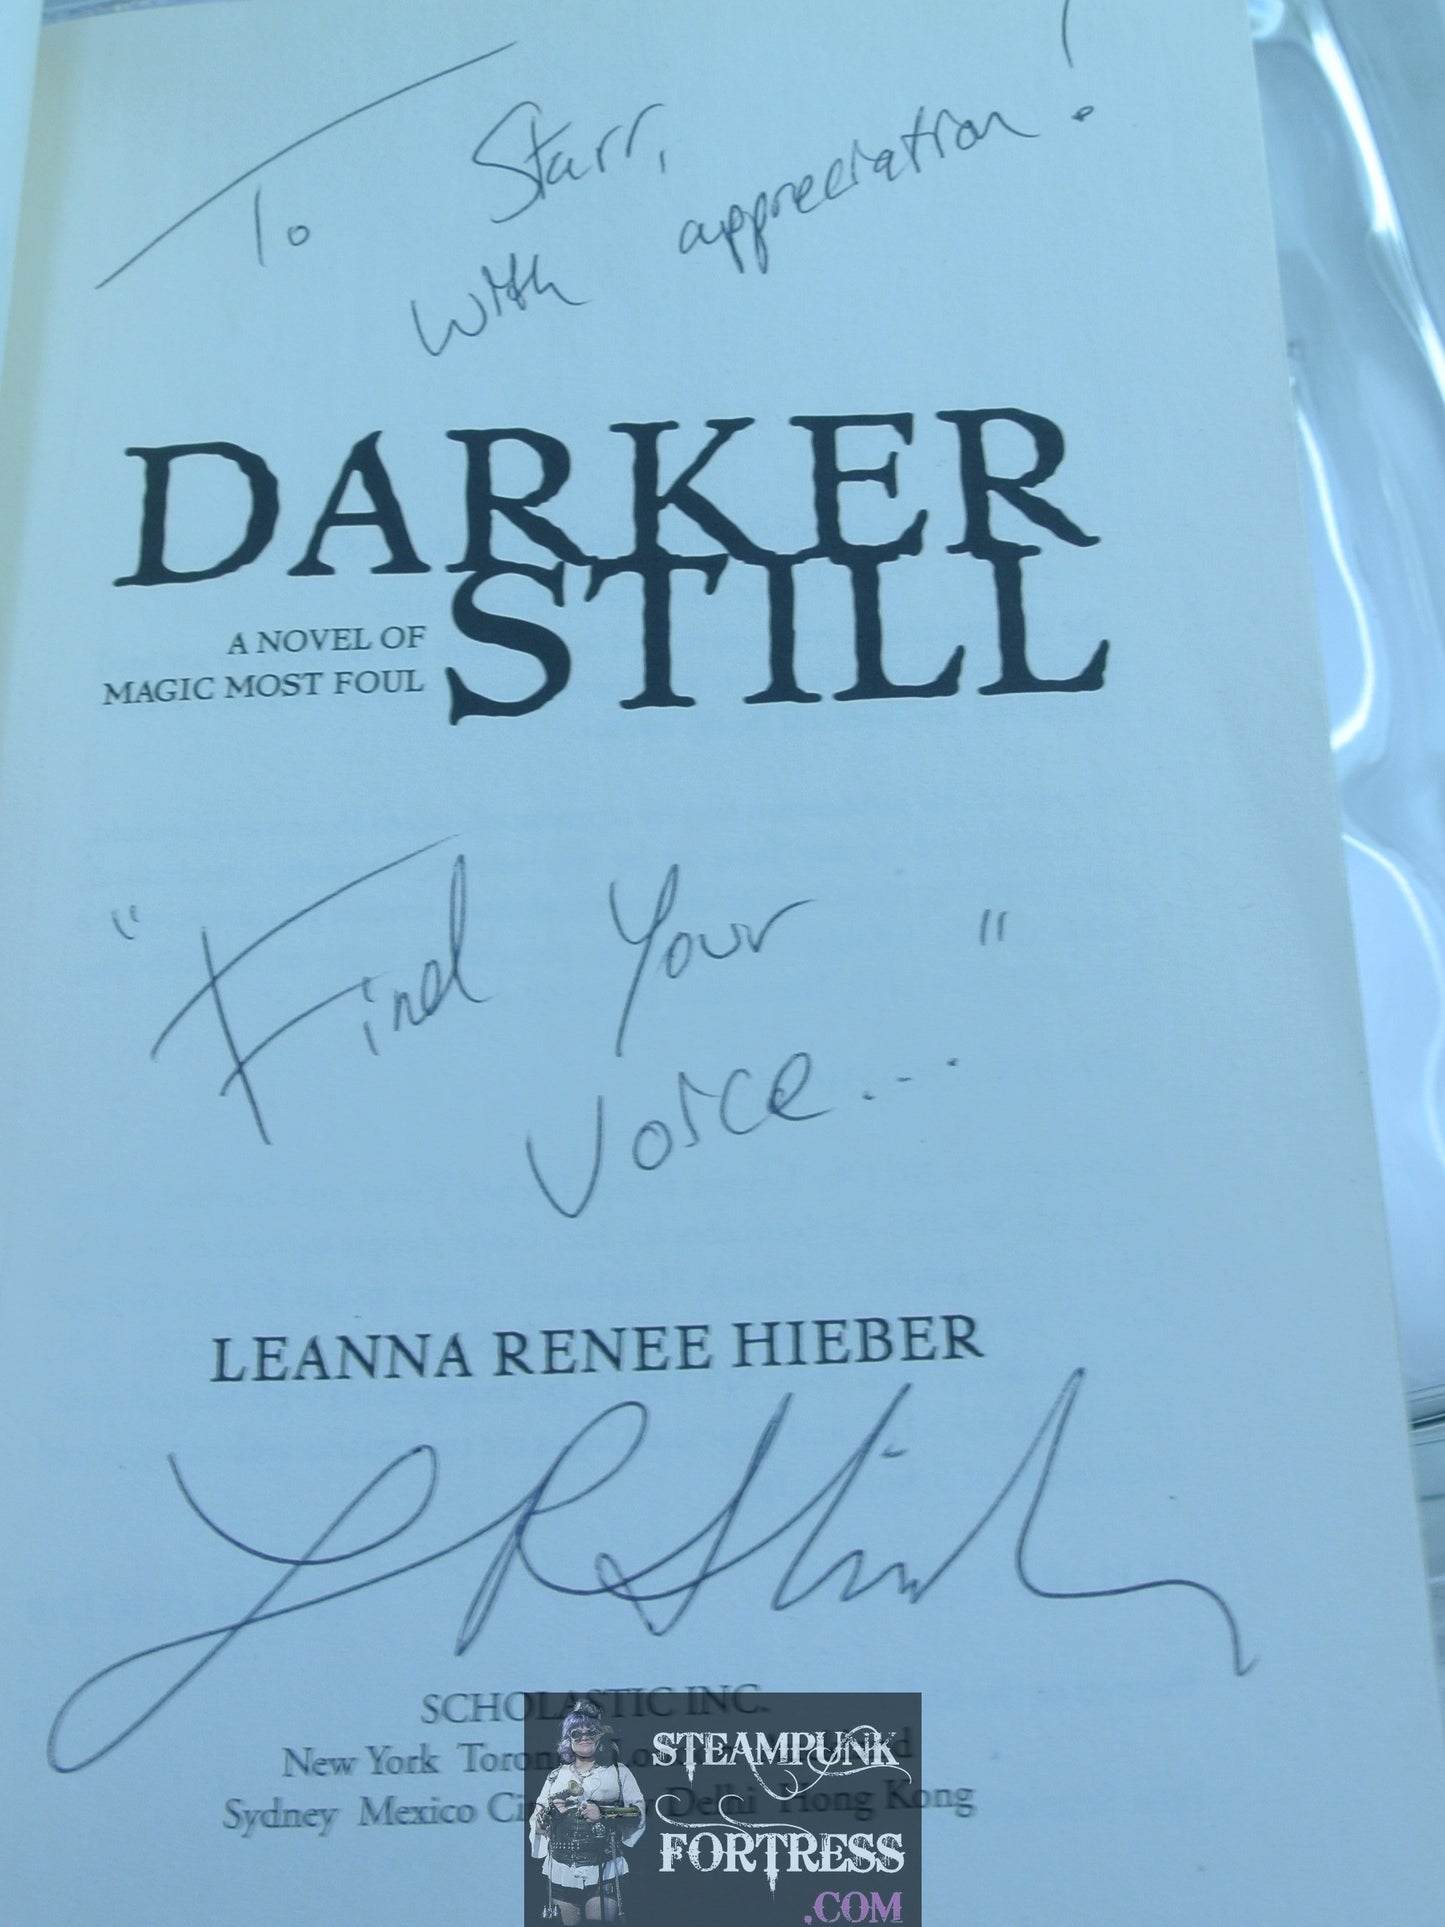 DARKER STILL LEANNA RENEE HIEBER AUTOGRAPHED SIGNED BOOK PAPERBACK VERY GOOD STEAMPUNK GOTHIC MAGIC